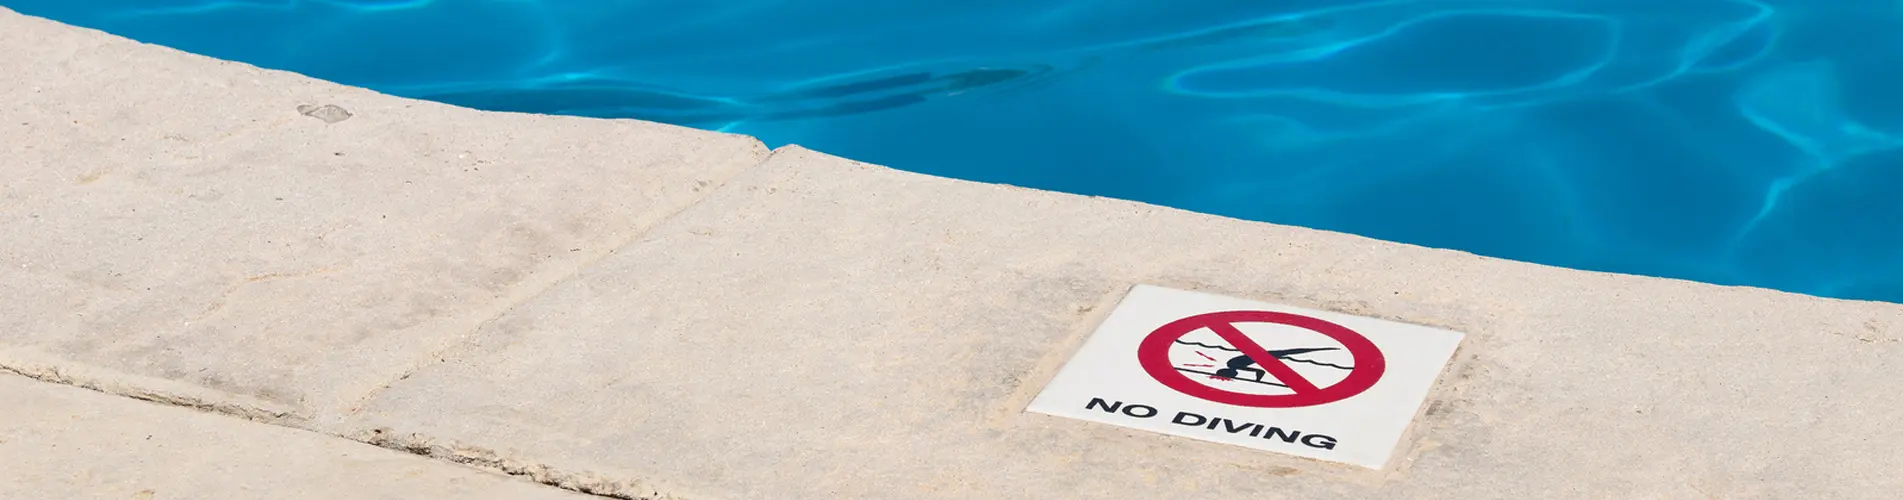 Pool Inspections for Pool Compliance Certificate